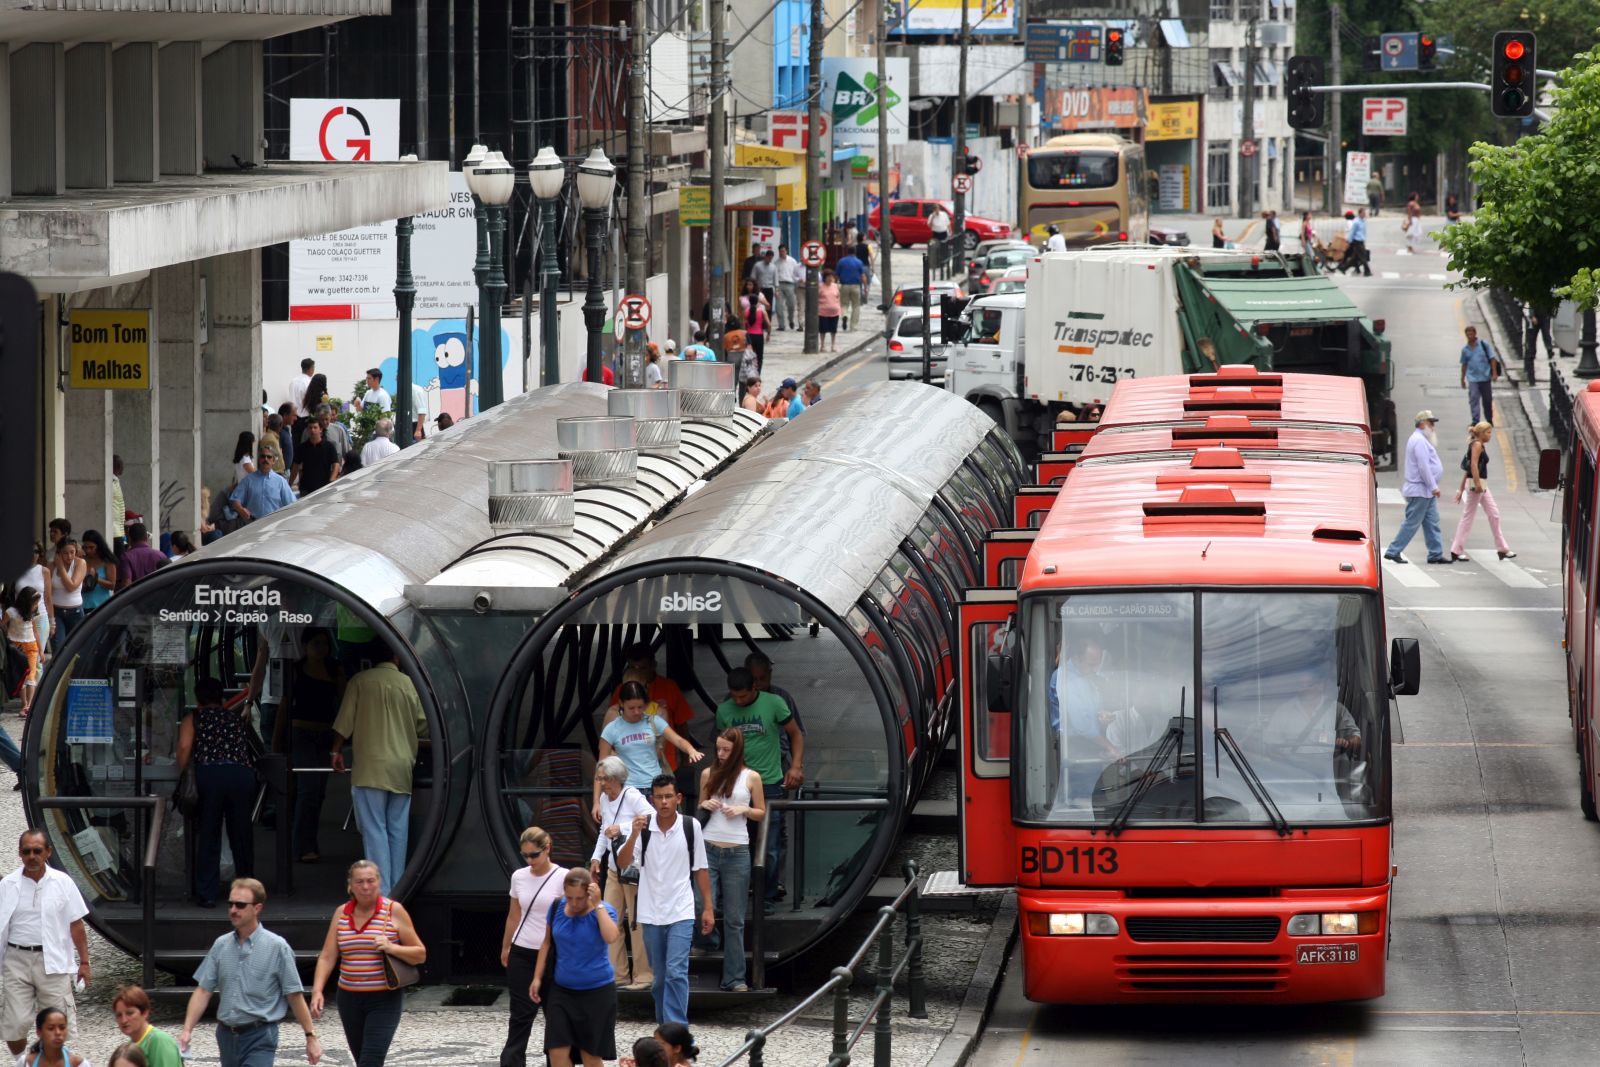 Curitiba in Brazil is a well-planned, pedestrian-friendly city with good public transport